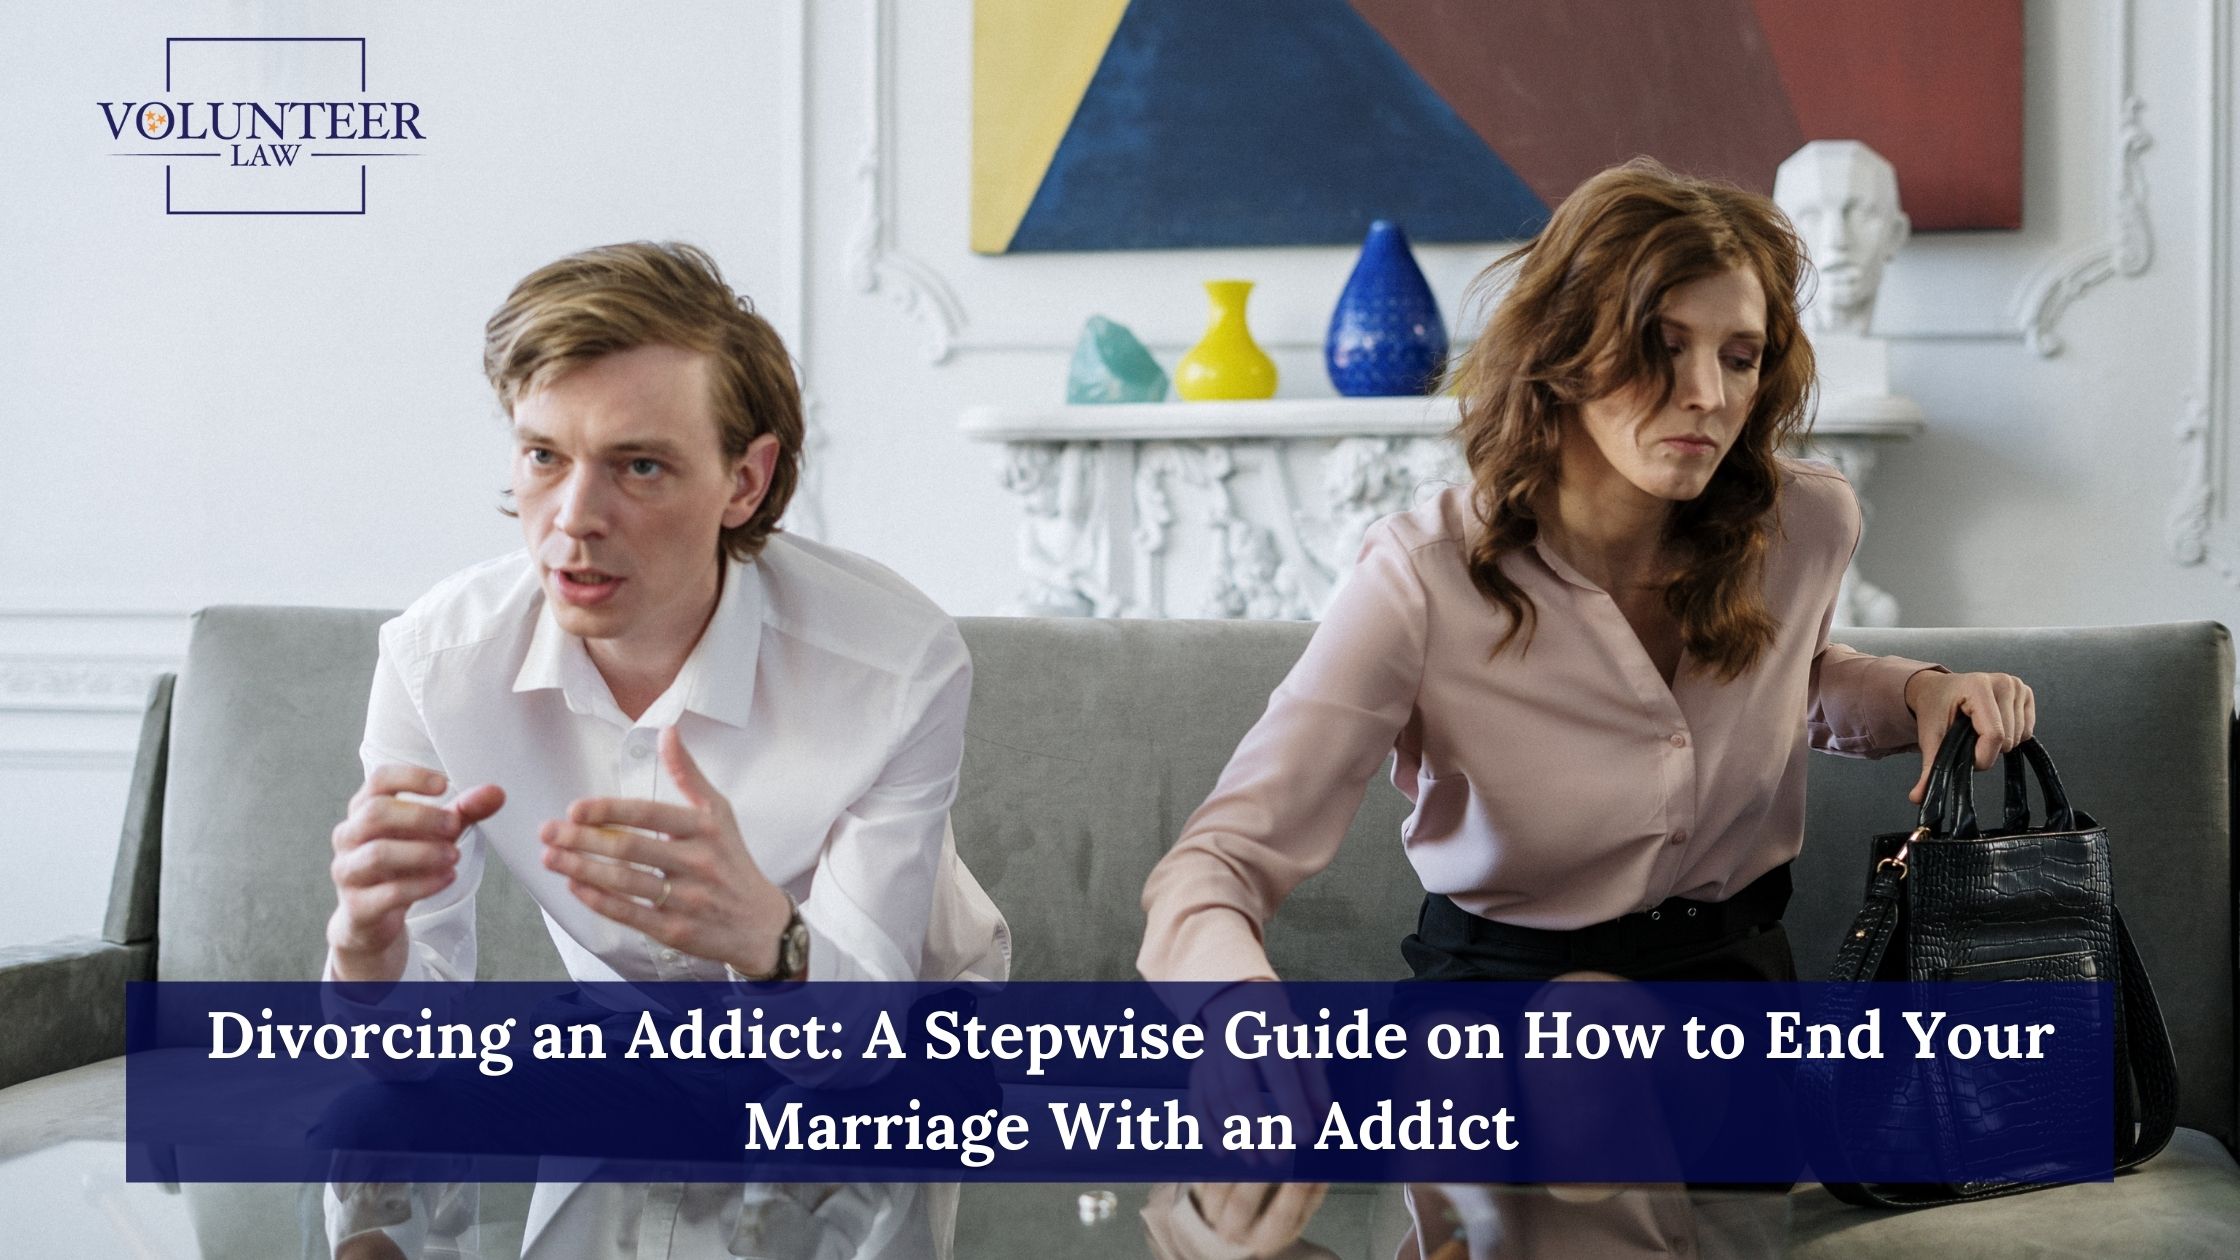 A Stepwise Guide on How to Get Divorce With an Addict